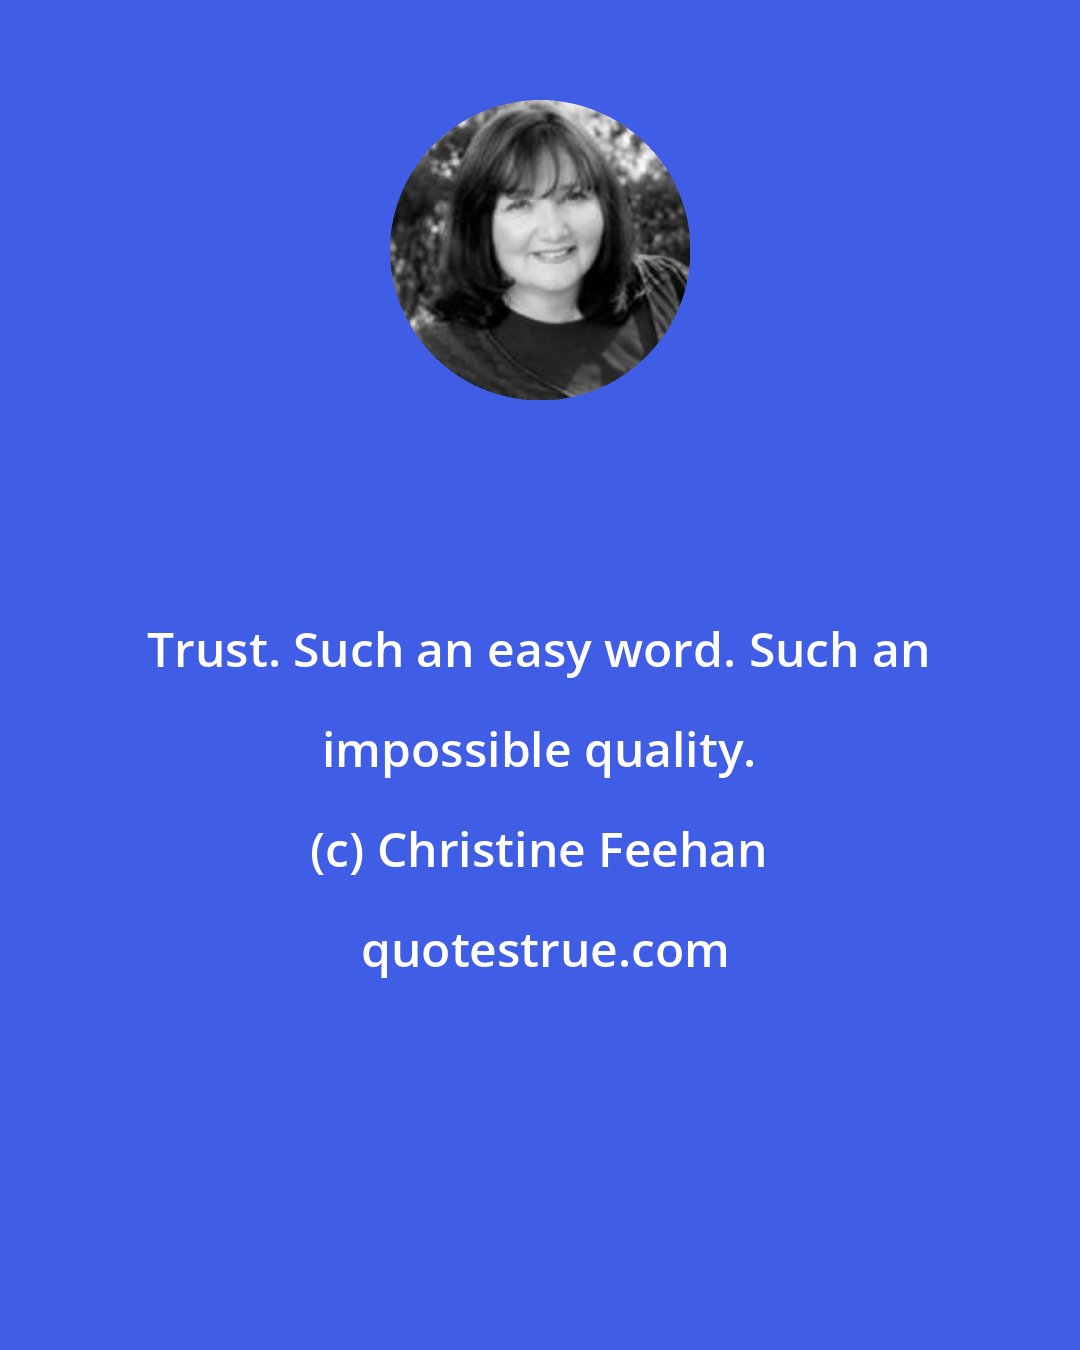 Christine Feehan: Trust. Such an easy word. Such an impossible quality.